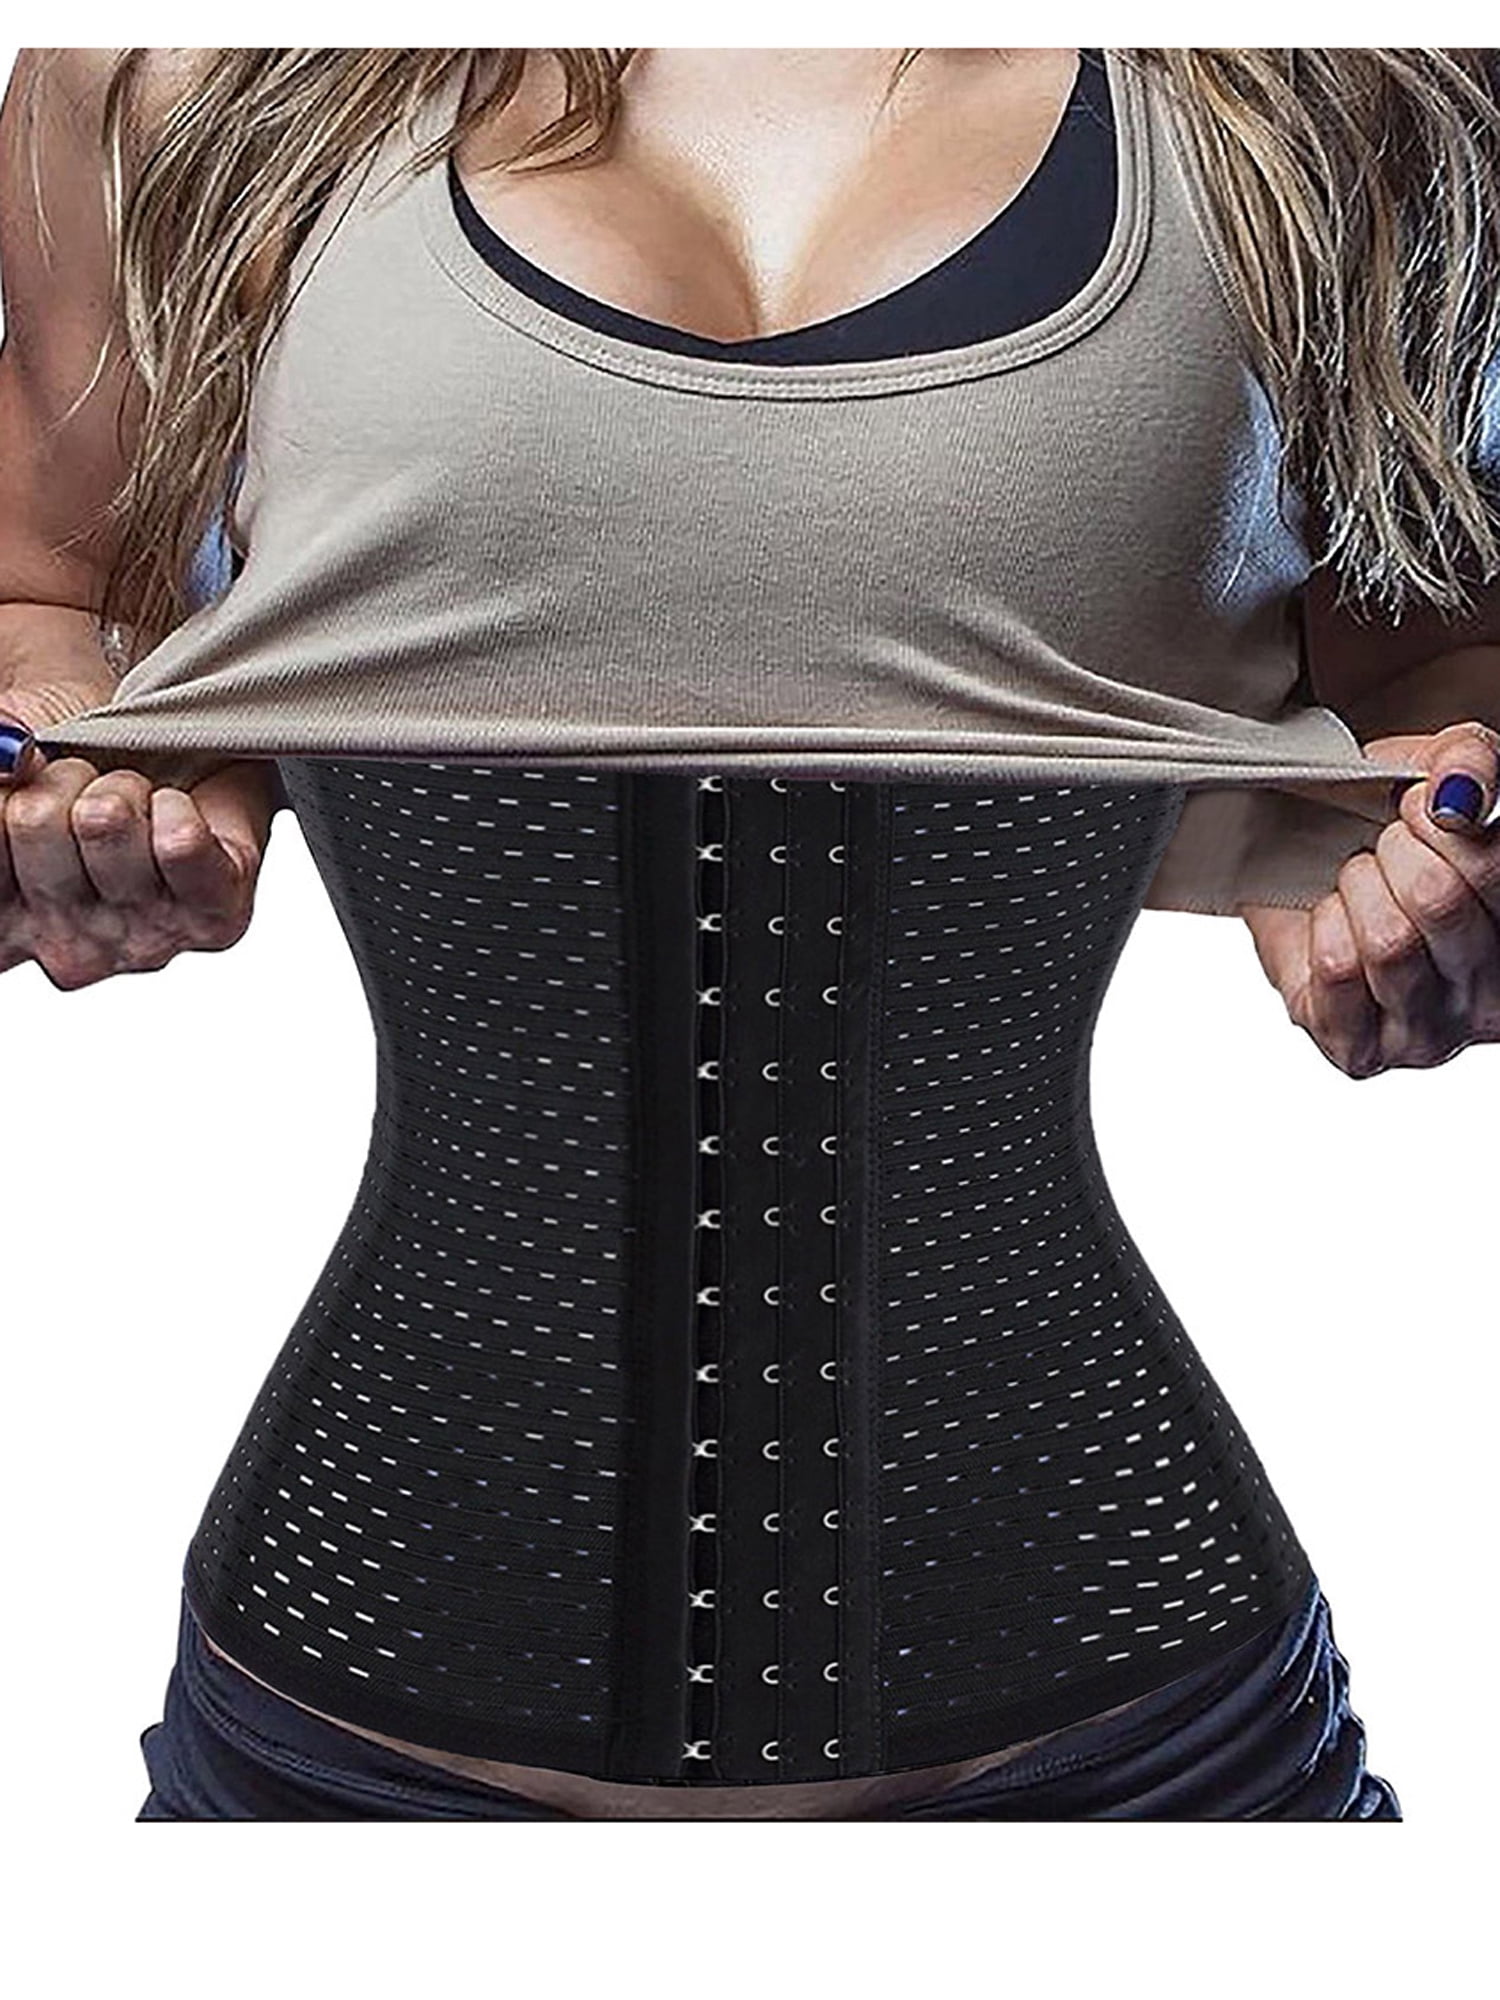  Wuluwala Womens Waist Trainer for Weight Loss Trimmer